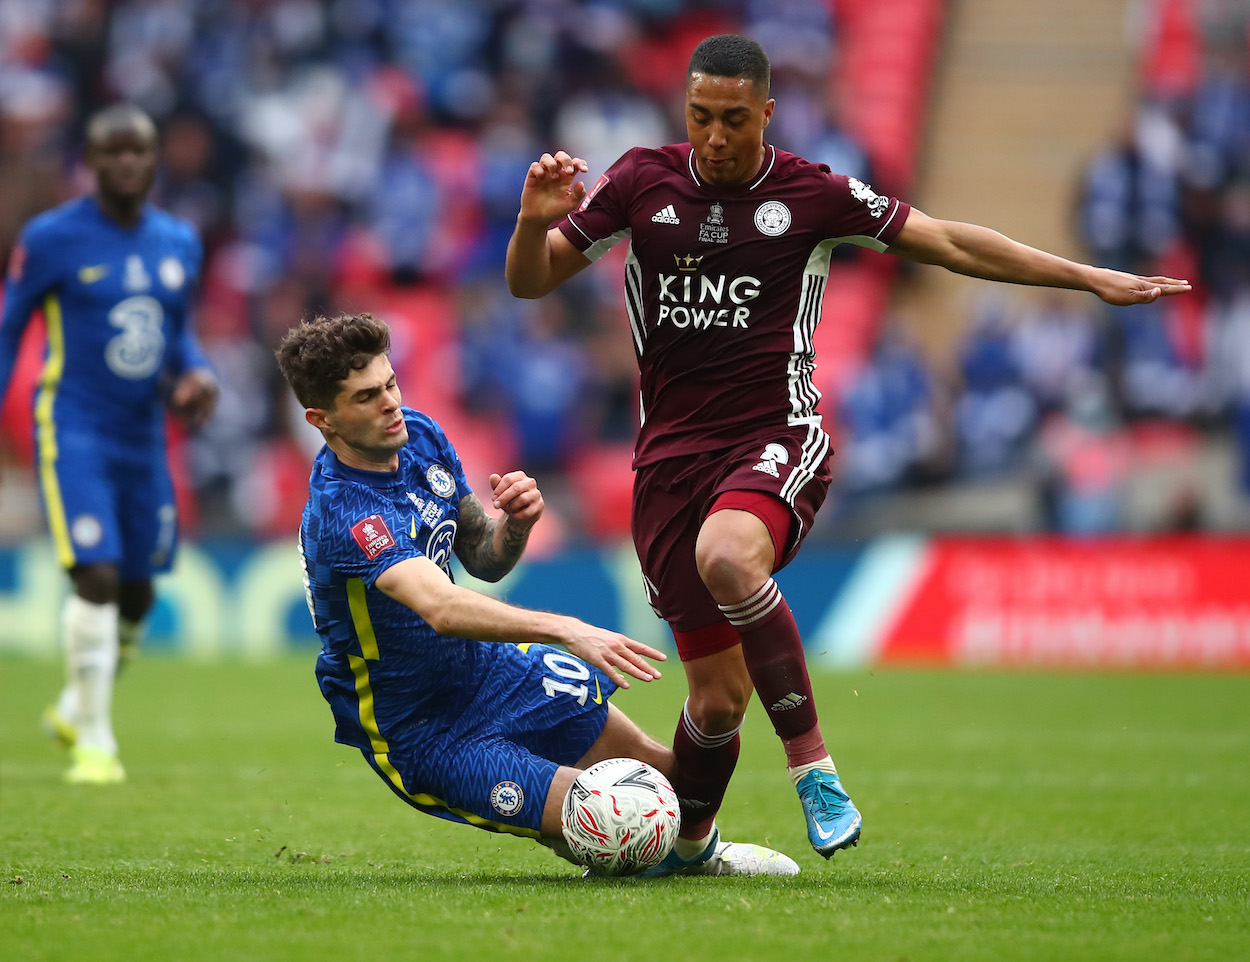 Christian Pulisic of Chelsea challenges Youri Tielemans of Leicester City during The Emirates FA Cup Final match between Chelsea and Leicester City at Wembley Stadium on May 15, 2021 in London, England.